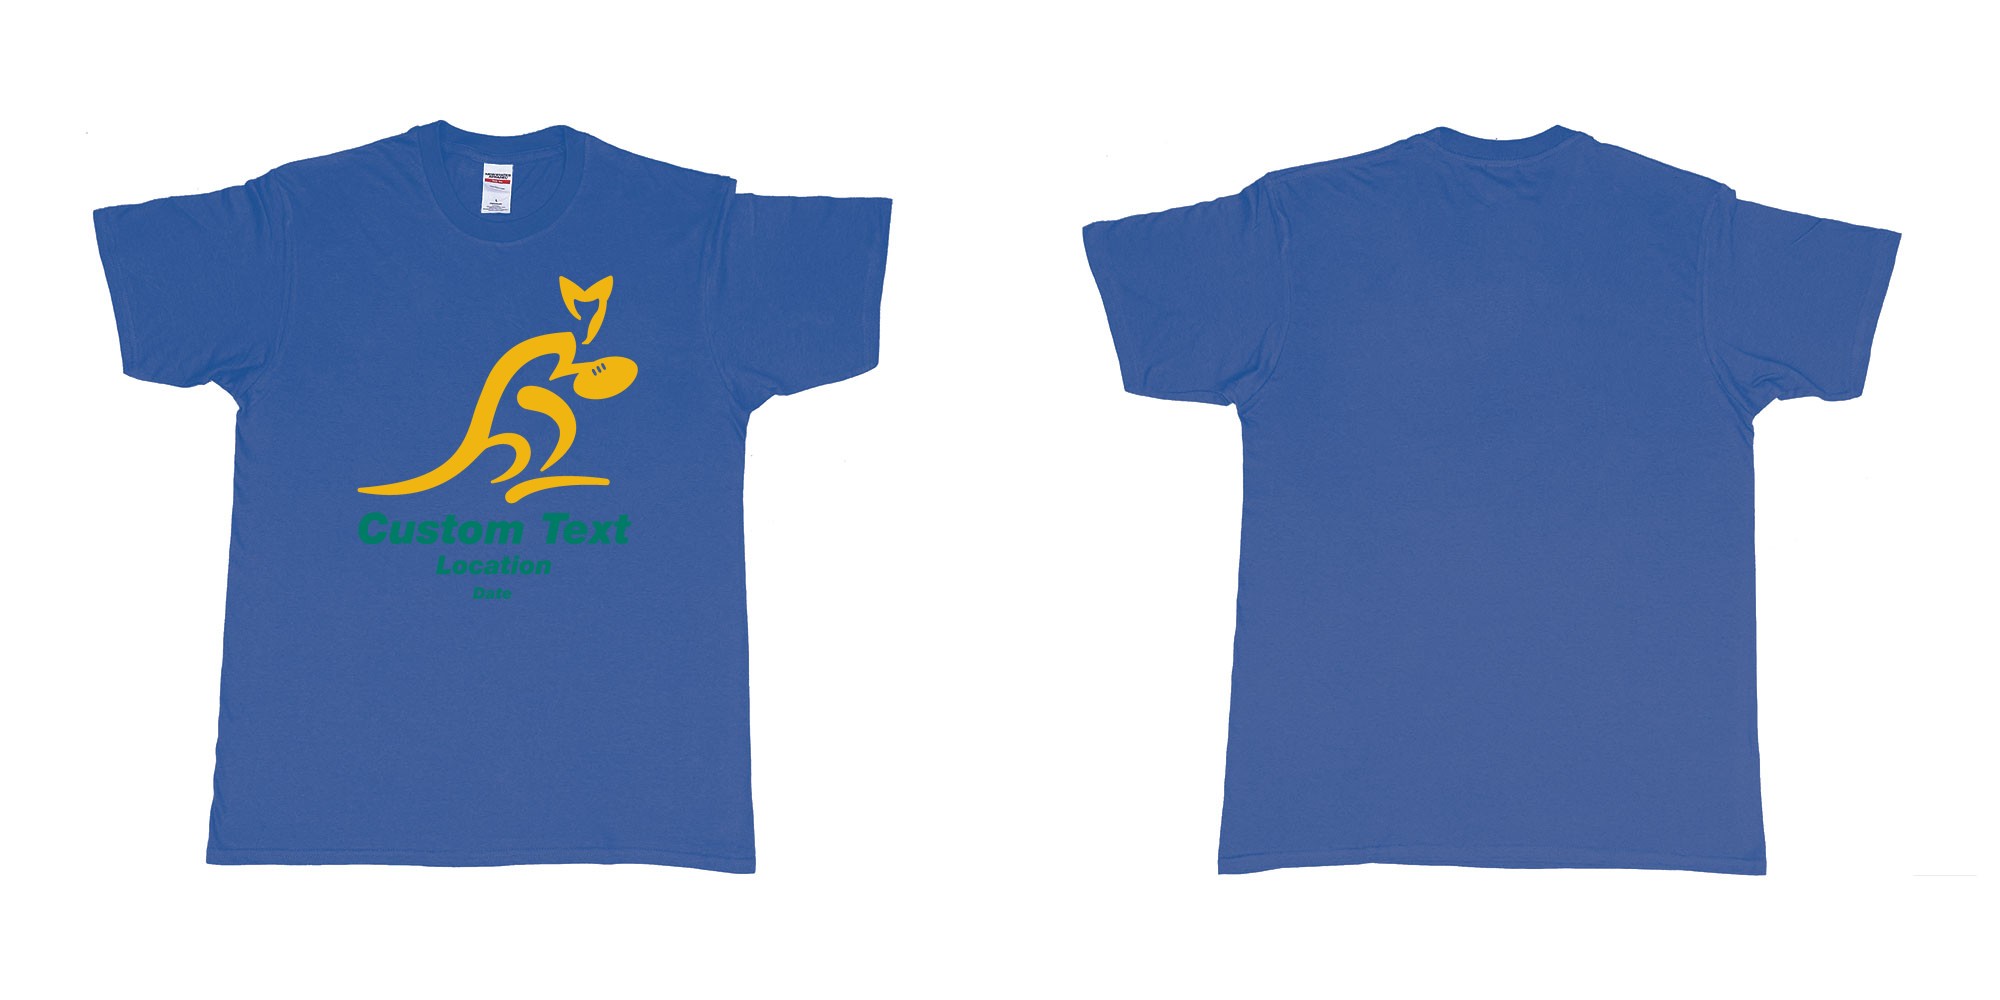 Custom tshirt design australia national rugby union team the wallabies in fabric color royal-blue choice your own text made in Bali by The Pirate Way